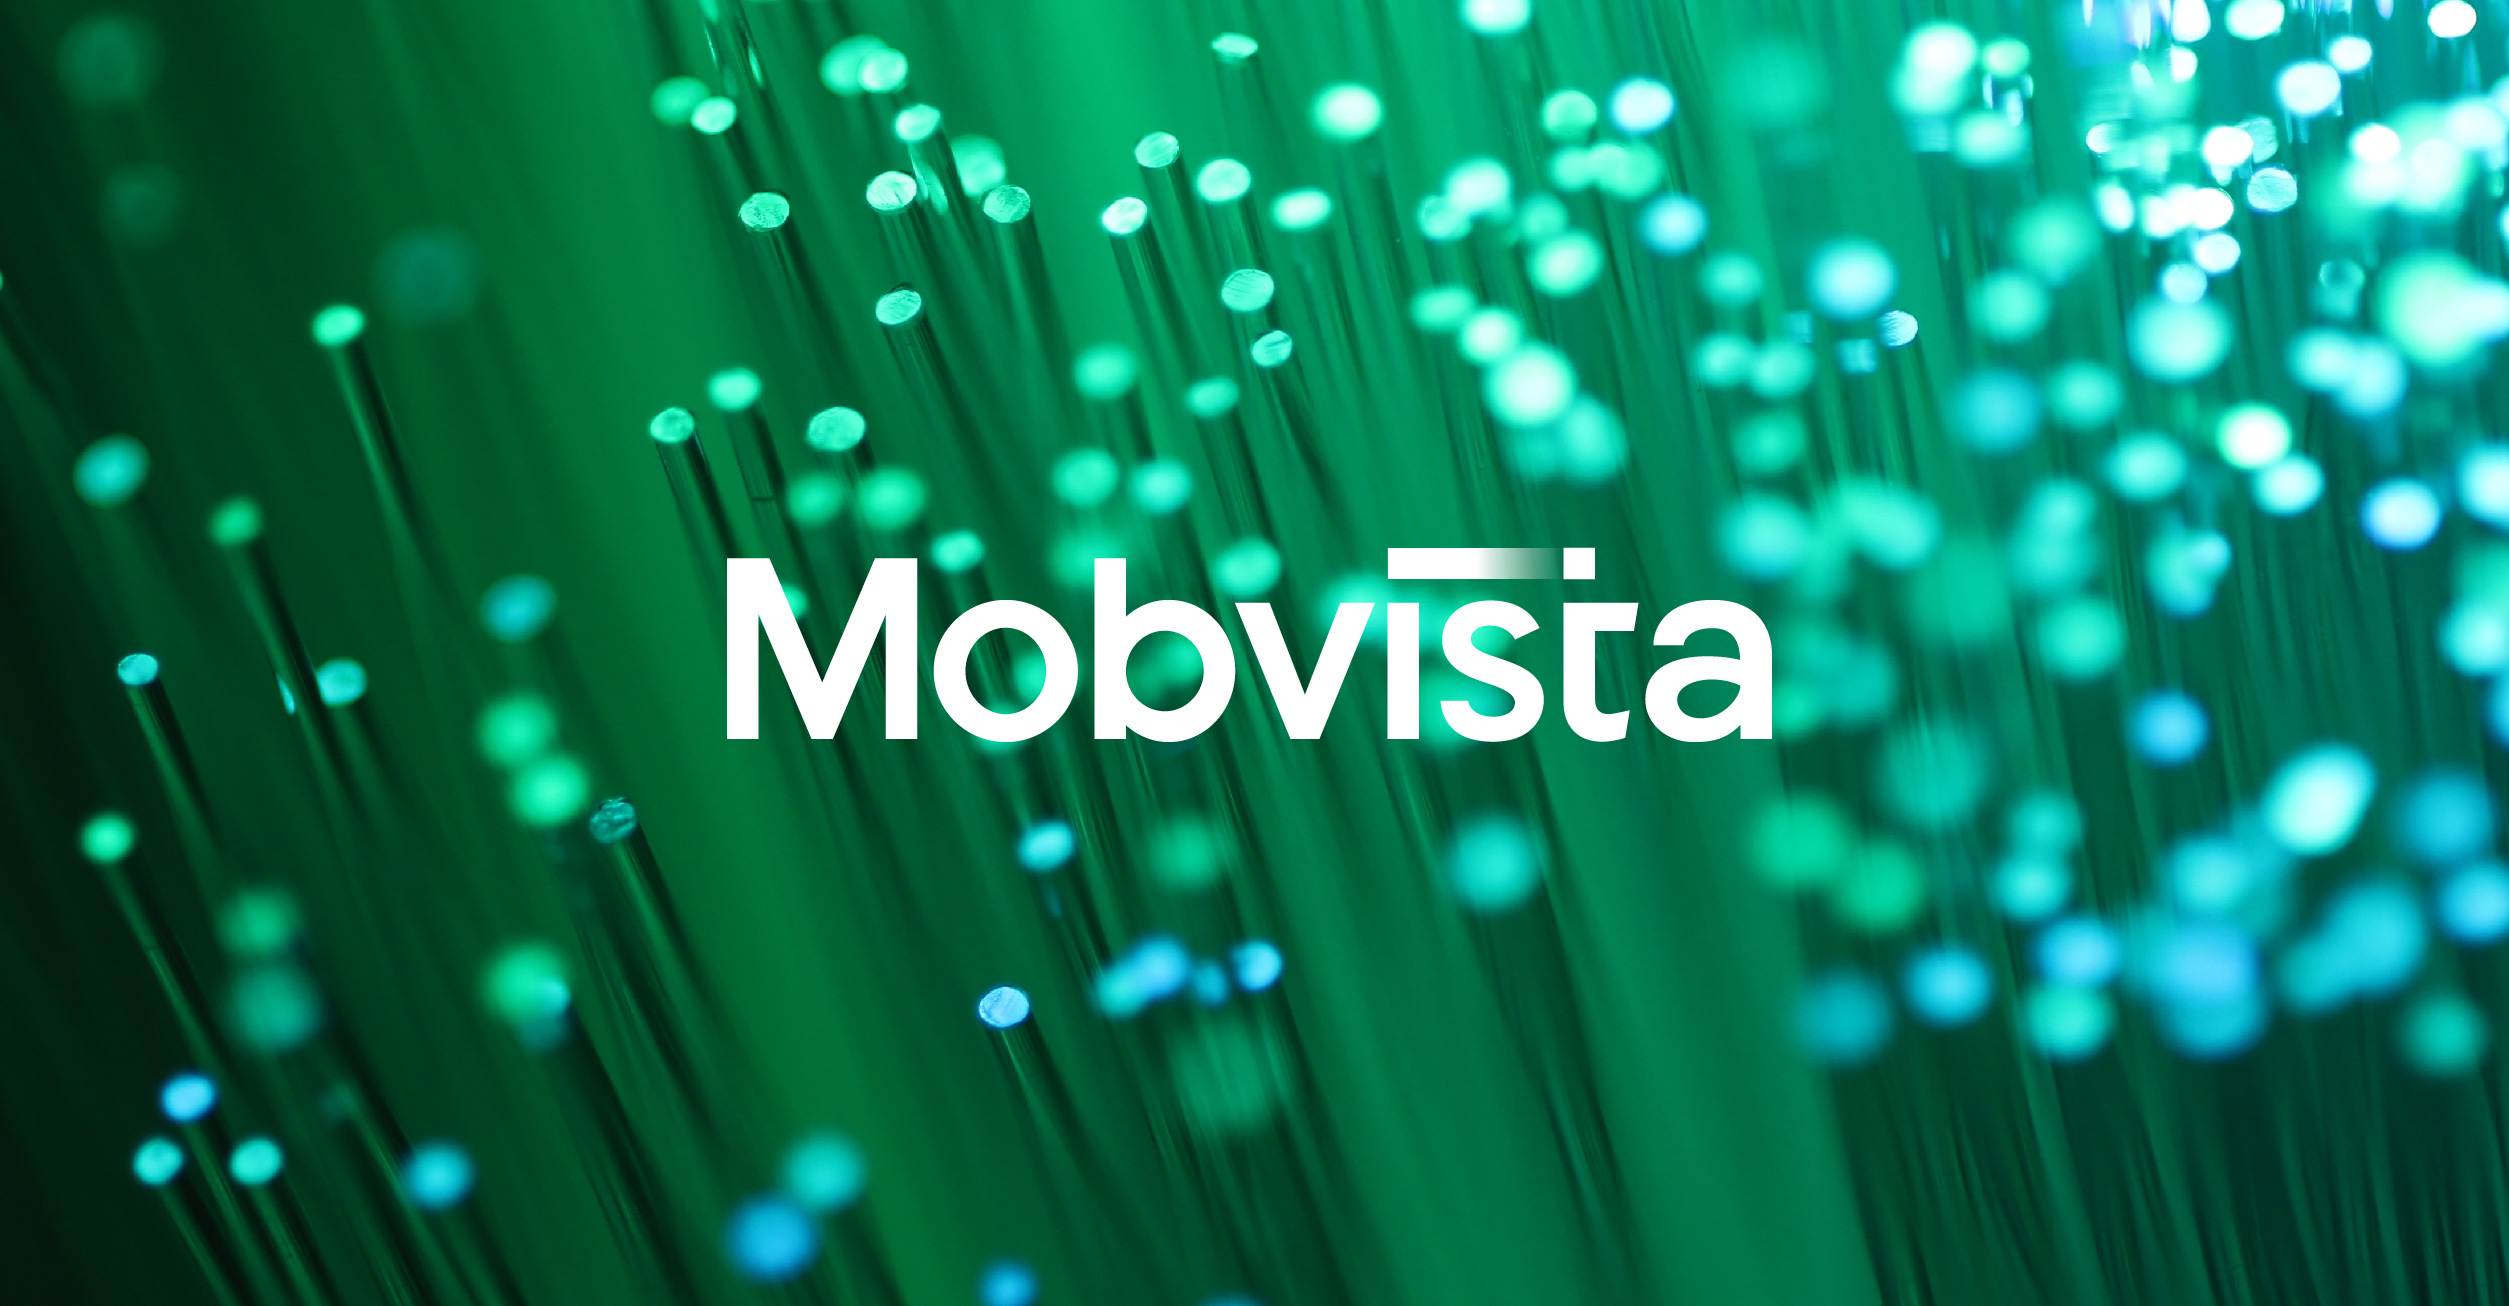 Mobvista, a leading mobile technology company providing a complete suite of advertising and analytics tools for app developers, has unveiled its 2022 financial results, showcasing strong growth across key financial indicators. The company reported an 18.4% YoY increase in revenue, reaching $894 million. After accounting for costs allocated to traffic publishers, net income rose to $225 million, marking a 51.1% YoY growth. Gross profit also experienced significant growth, achieving $177 million with a 45.2% YoY increase. Additionally, adjusted EBITDA registered a 53.6% YoY rise, totaling $36.14 million.